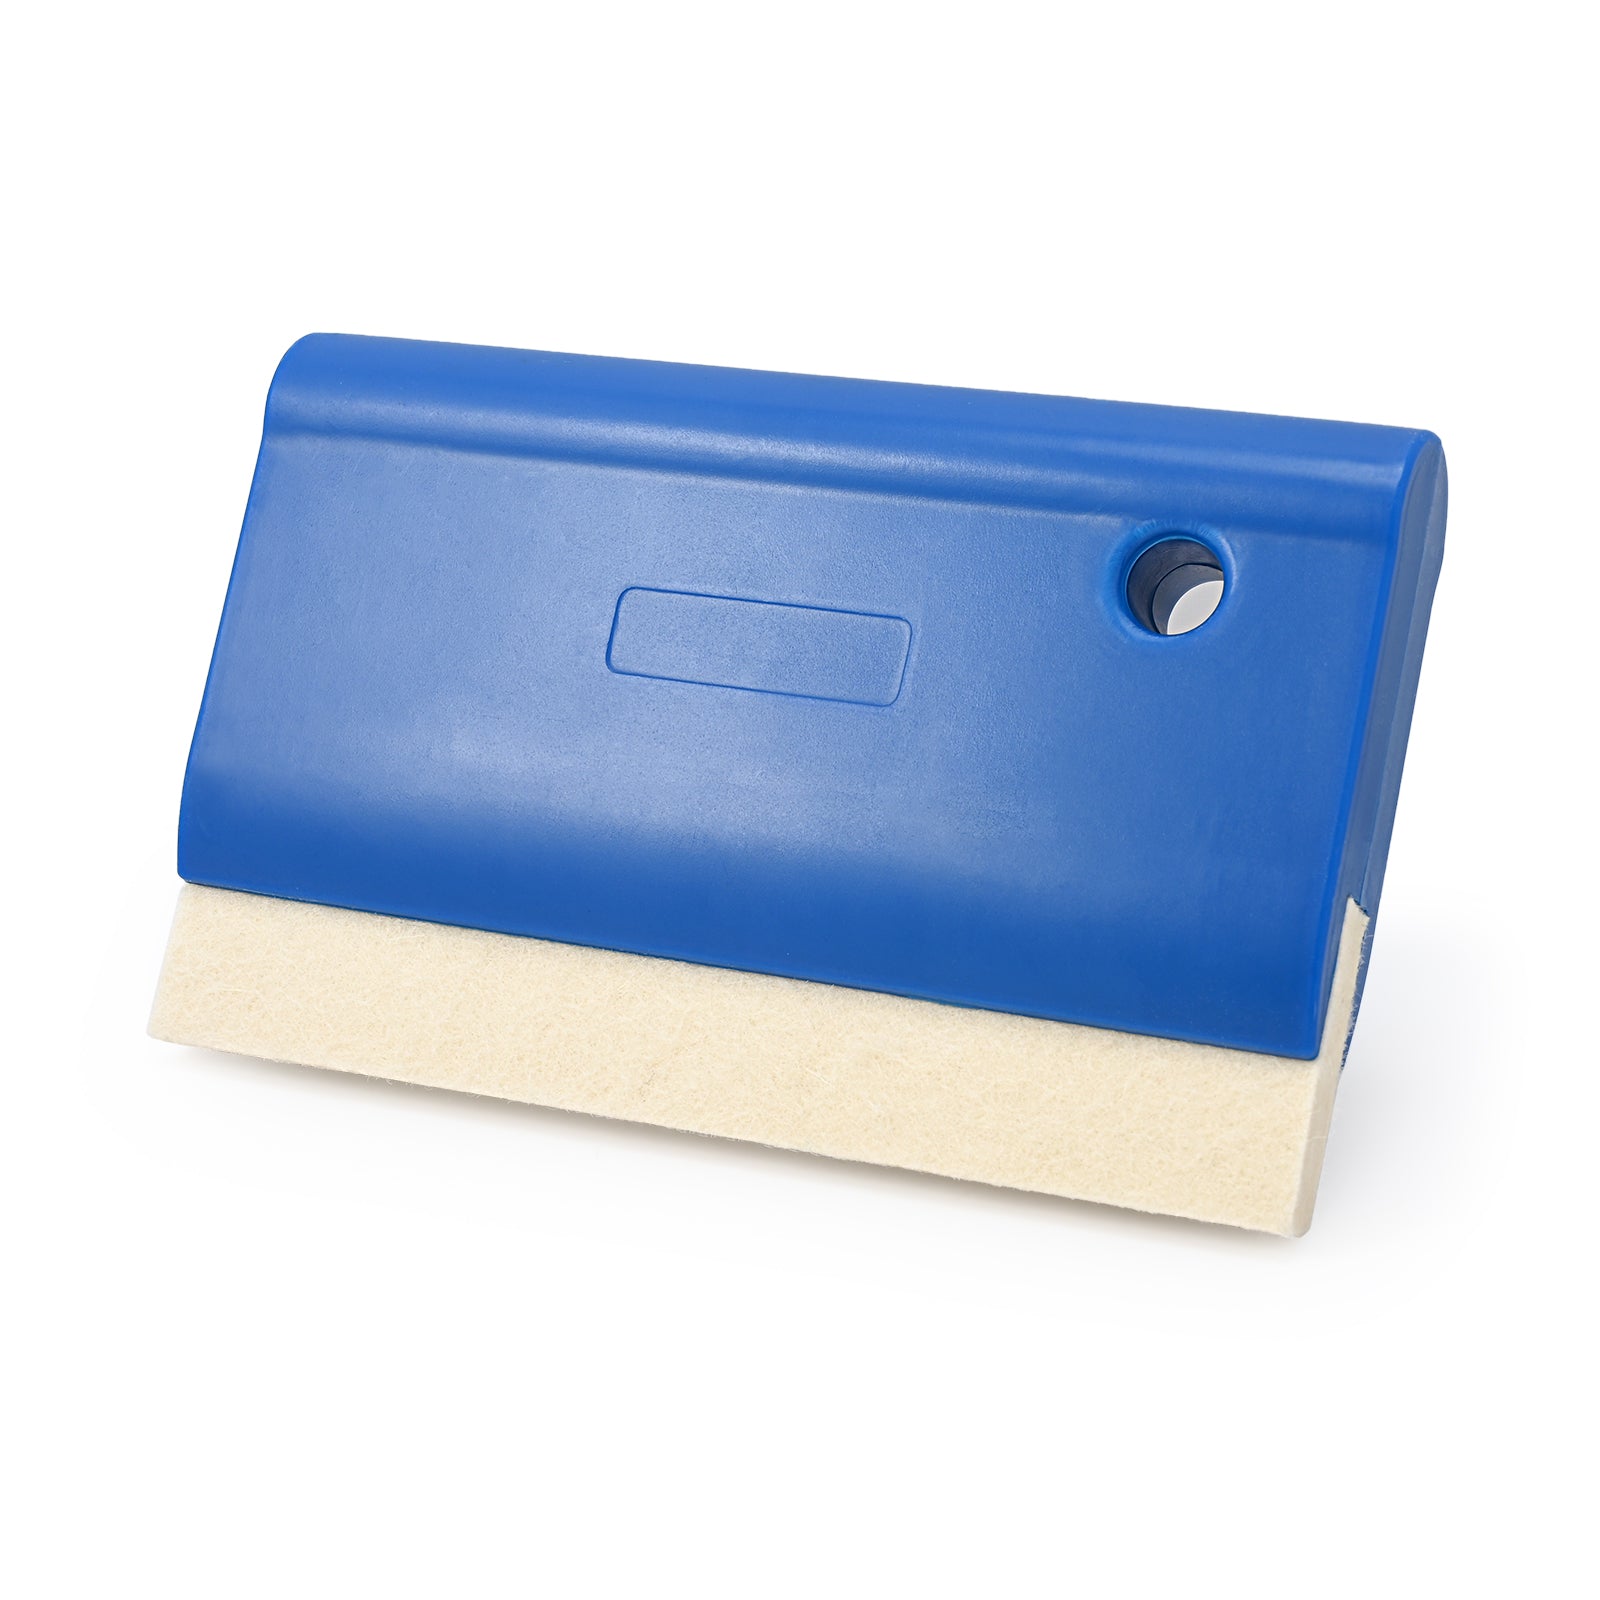 Soft Blue Plastic Squeegee for Film Installation